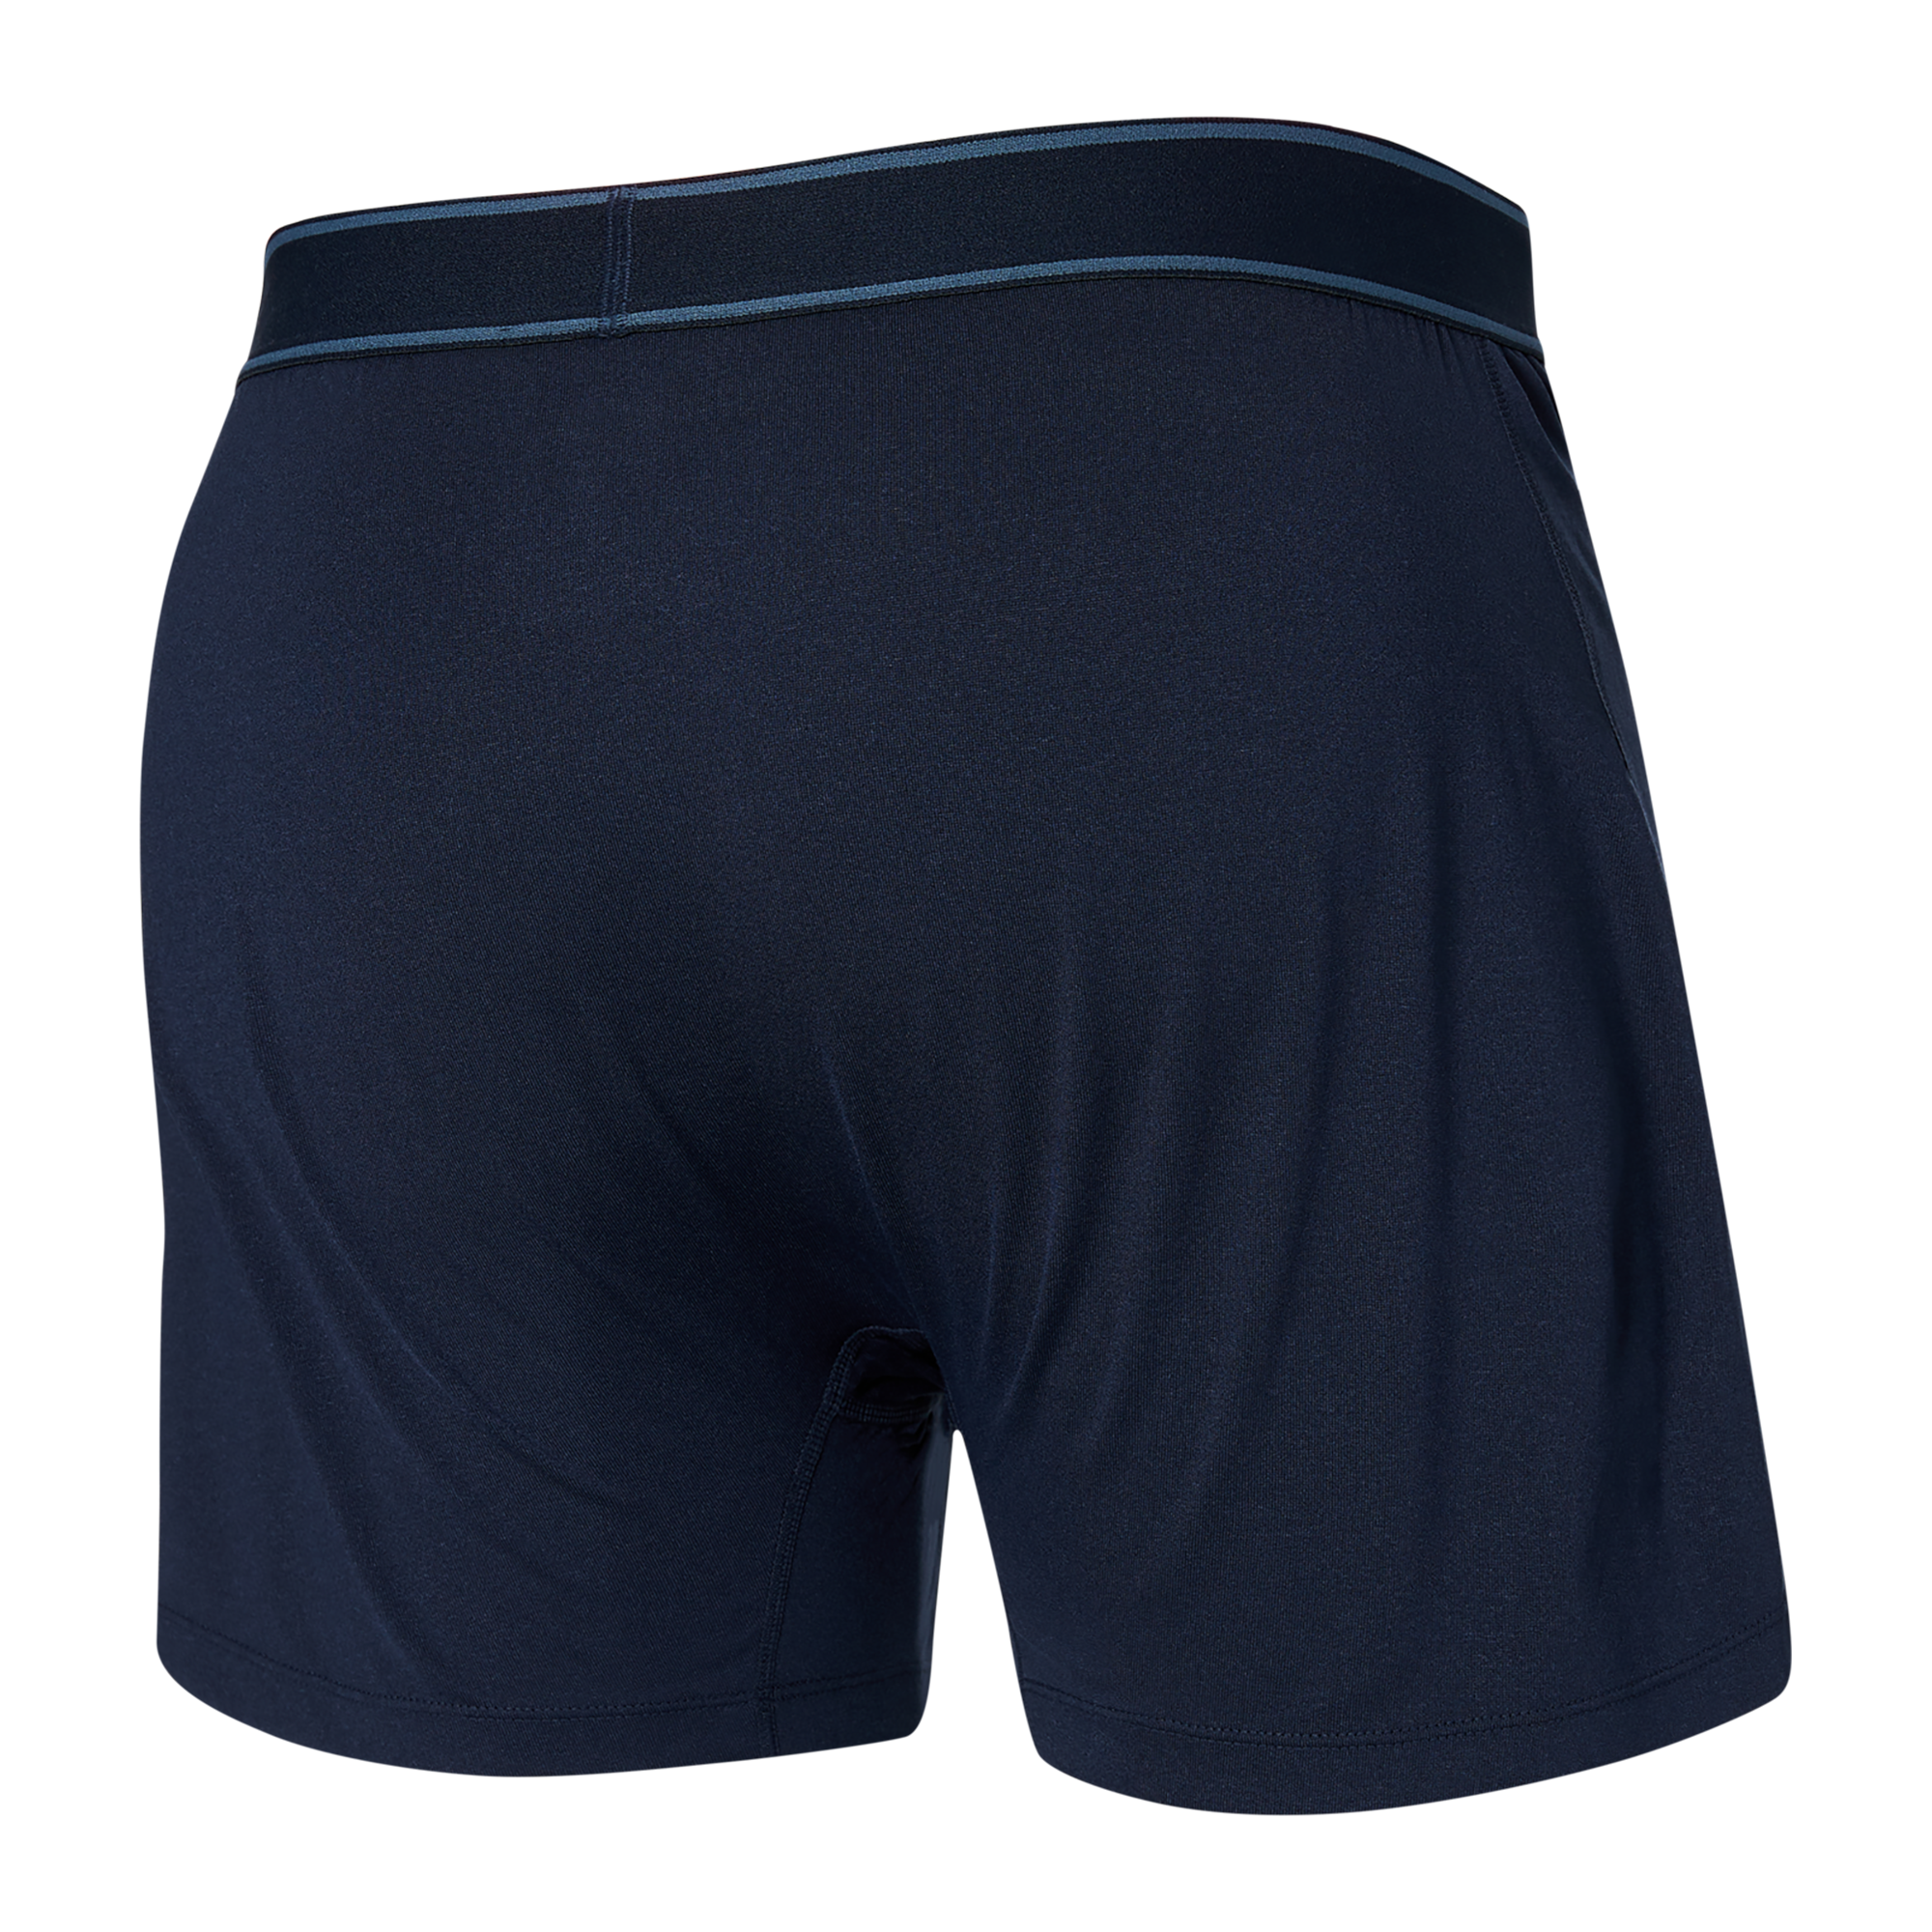 Back of Daytripper Loose Boxer Fly in Navy Heather